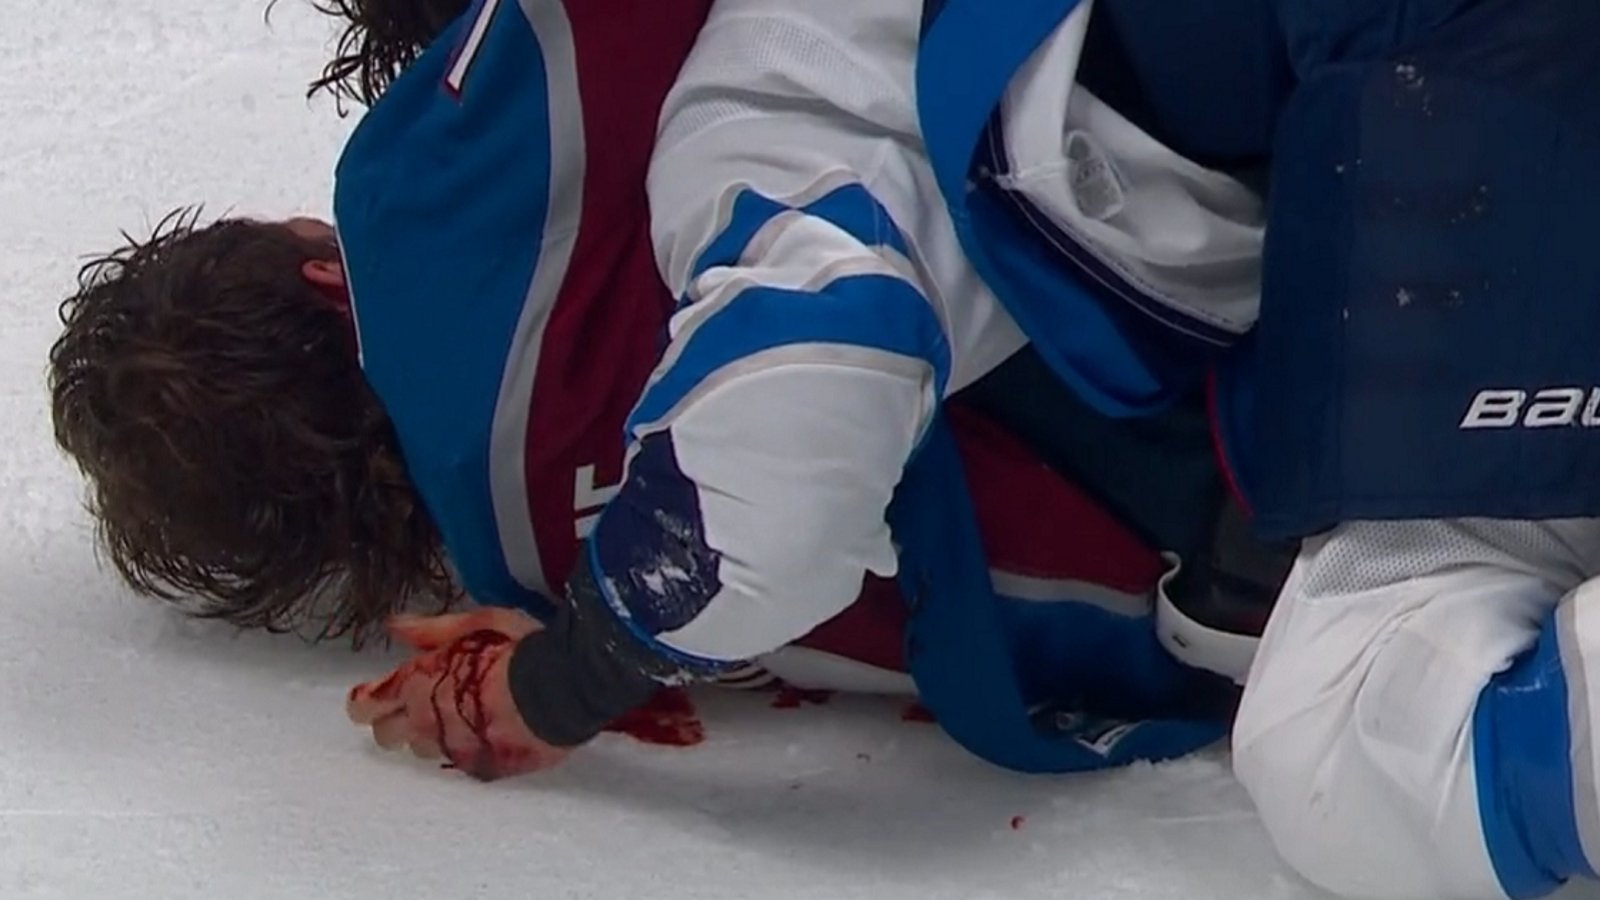 Closer look at Brendan Dillon's injury after brawl in Game 3.